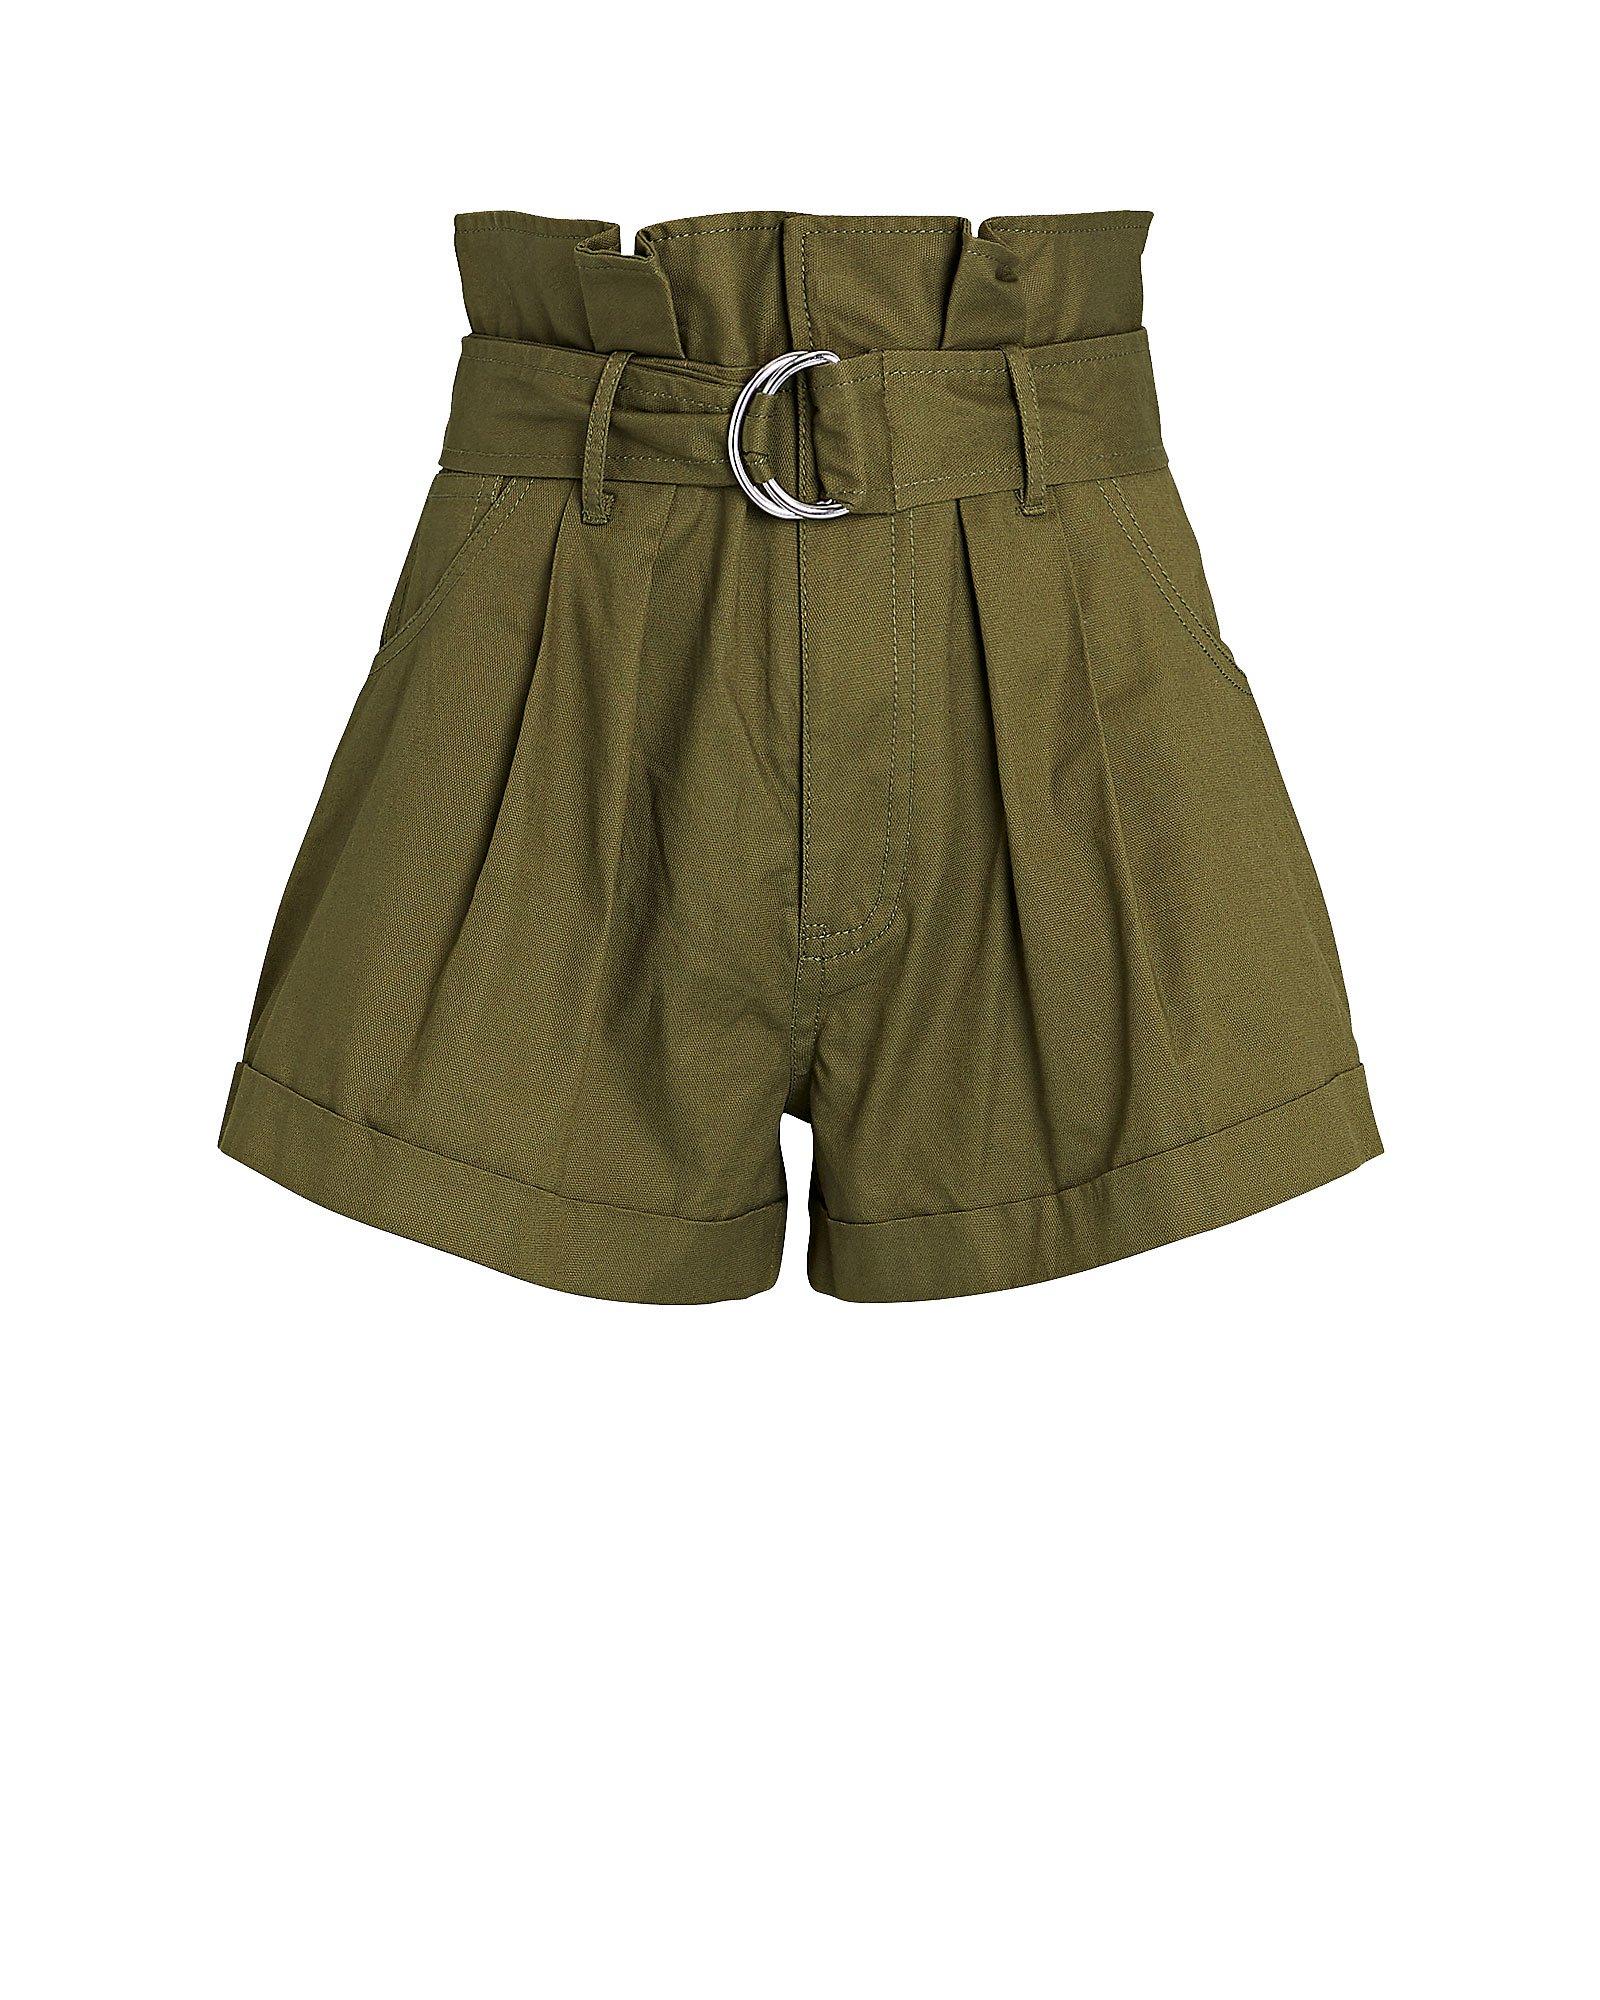 Marissa Webb Cotton Dixon Twill Paperbag Shorts in Olive/Army (Green ...